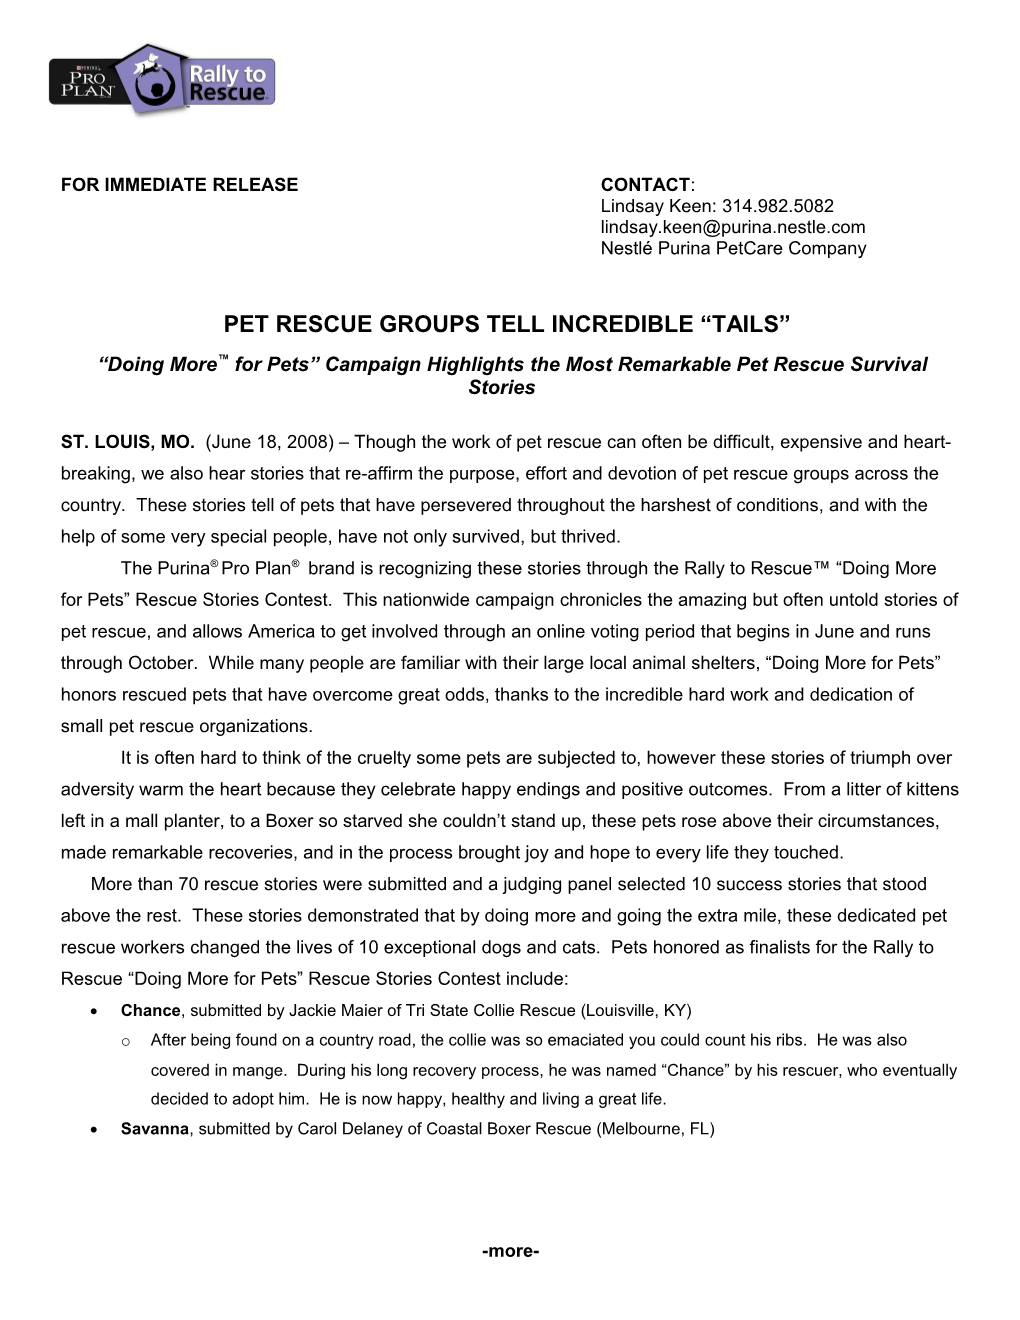 Pro Plan Rally to Rescue Doing More for Pets Page 1